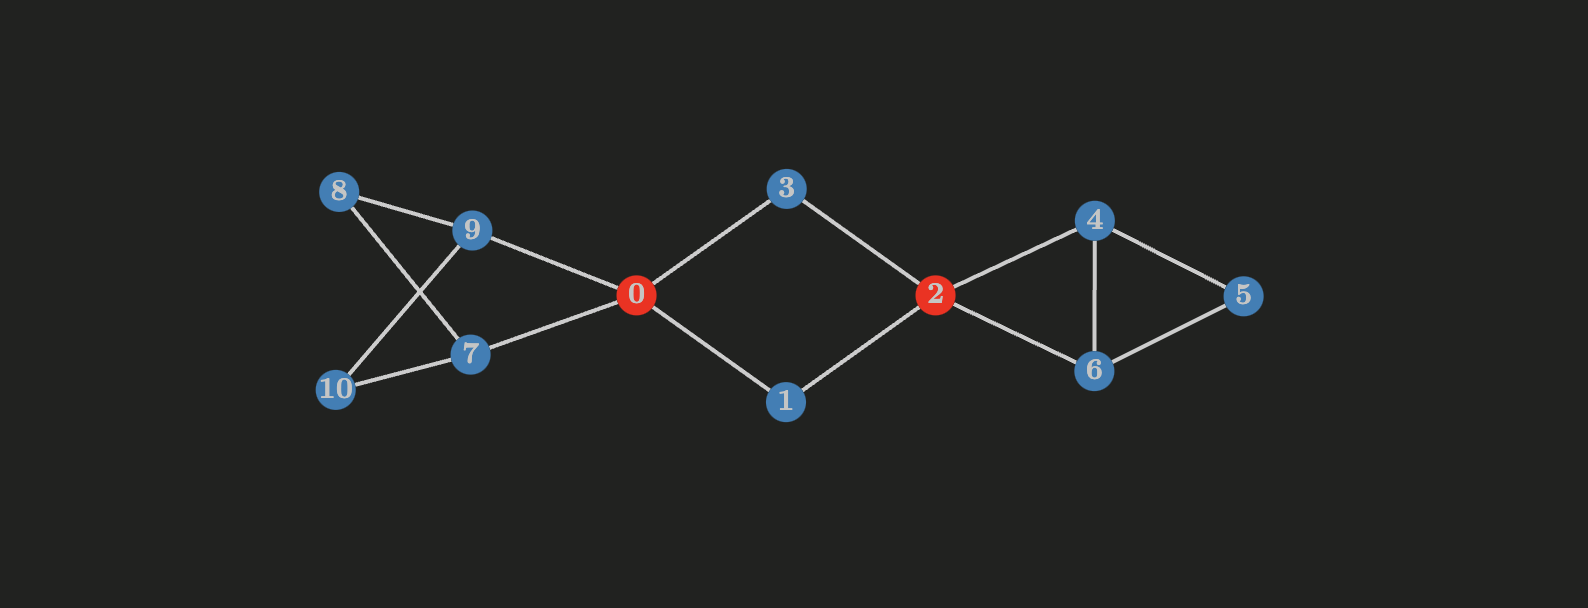 Cut-vertices (articulation points) in Graph Theory